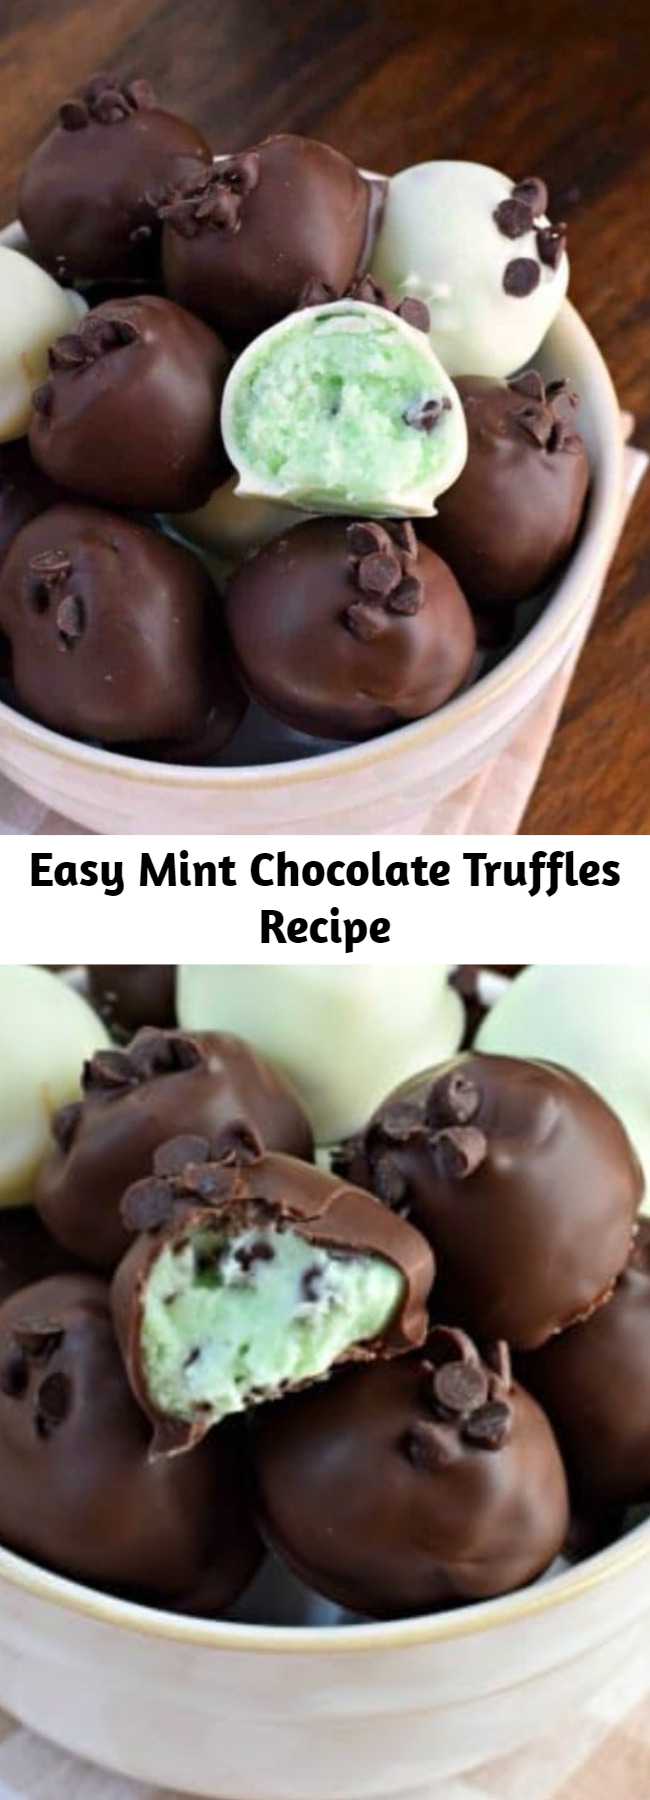 Easy Mint Chocolate Truffles Recipe - These Mint Chocolate Chip Truffles have a soft, creamy mint chocolate chip center and are coated in decadent chocolate! What are you waiting for? Go make some today!